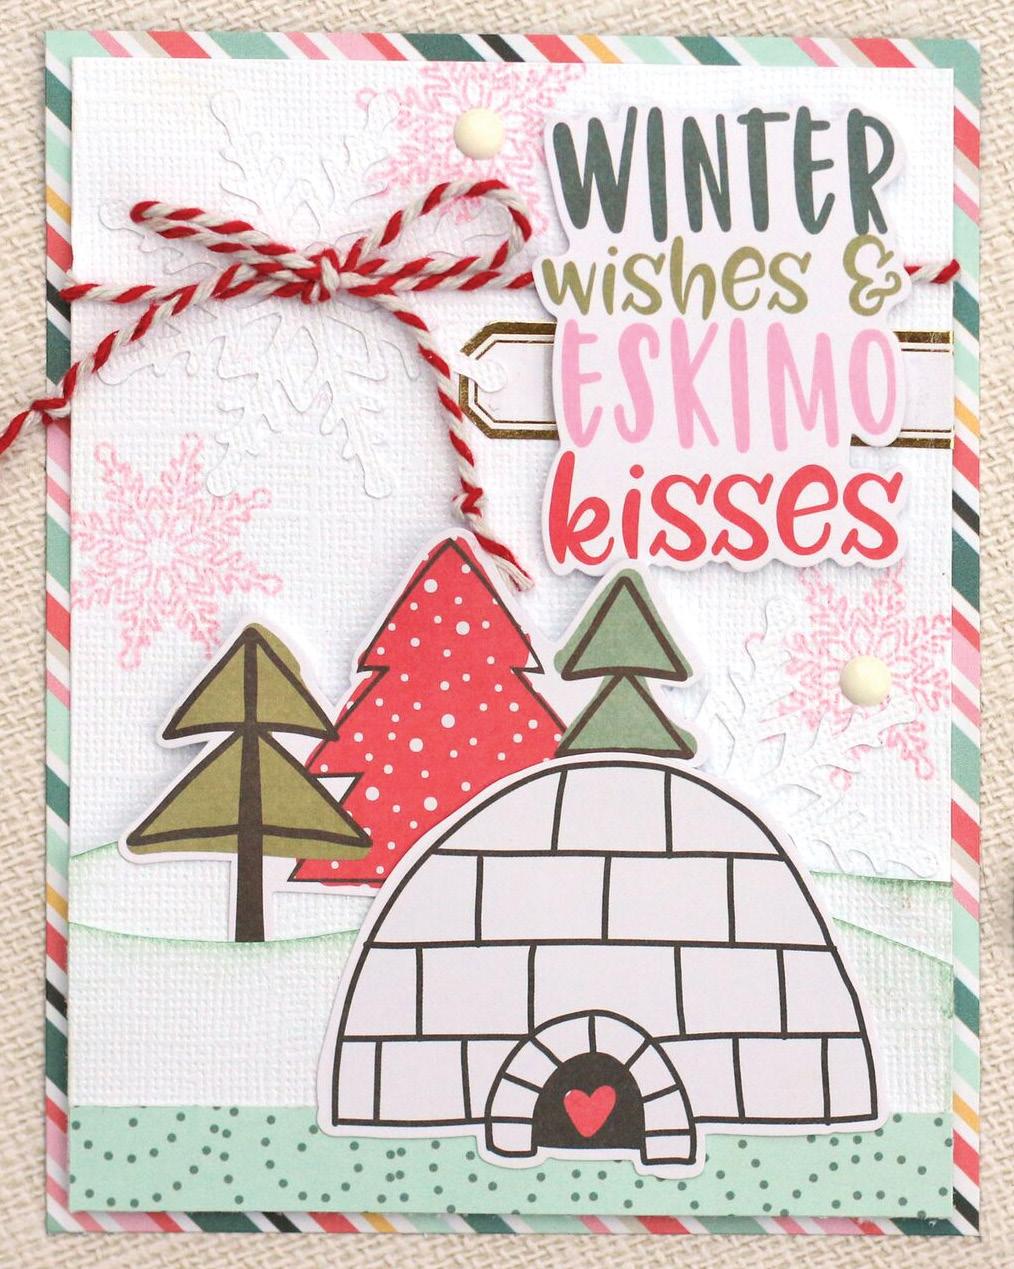 step-by-step card instructions WINTER WISHES CARD (4.25X5.5) 1 Trim a 4.25 x 5.5 piece of Shiverin paper (stripe side). Adhere to an A2 card base and set aside.